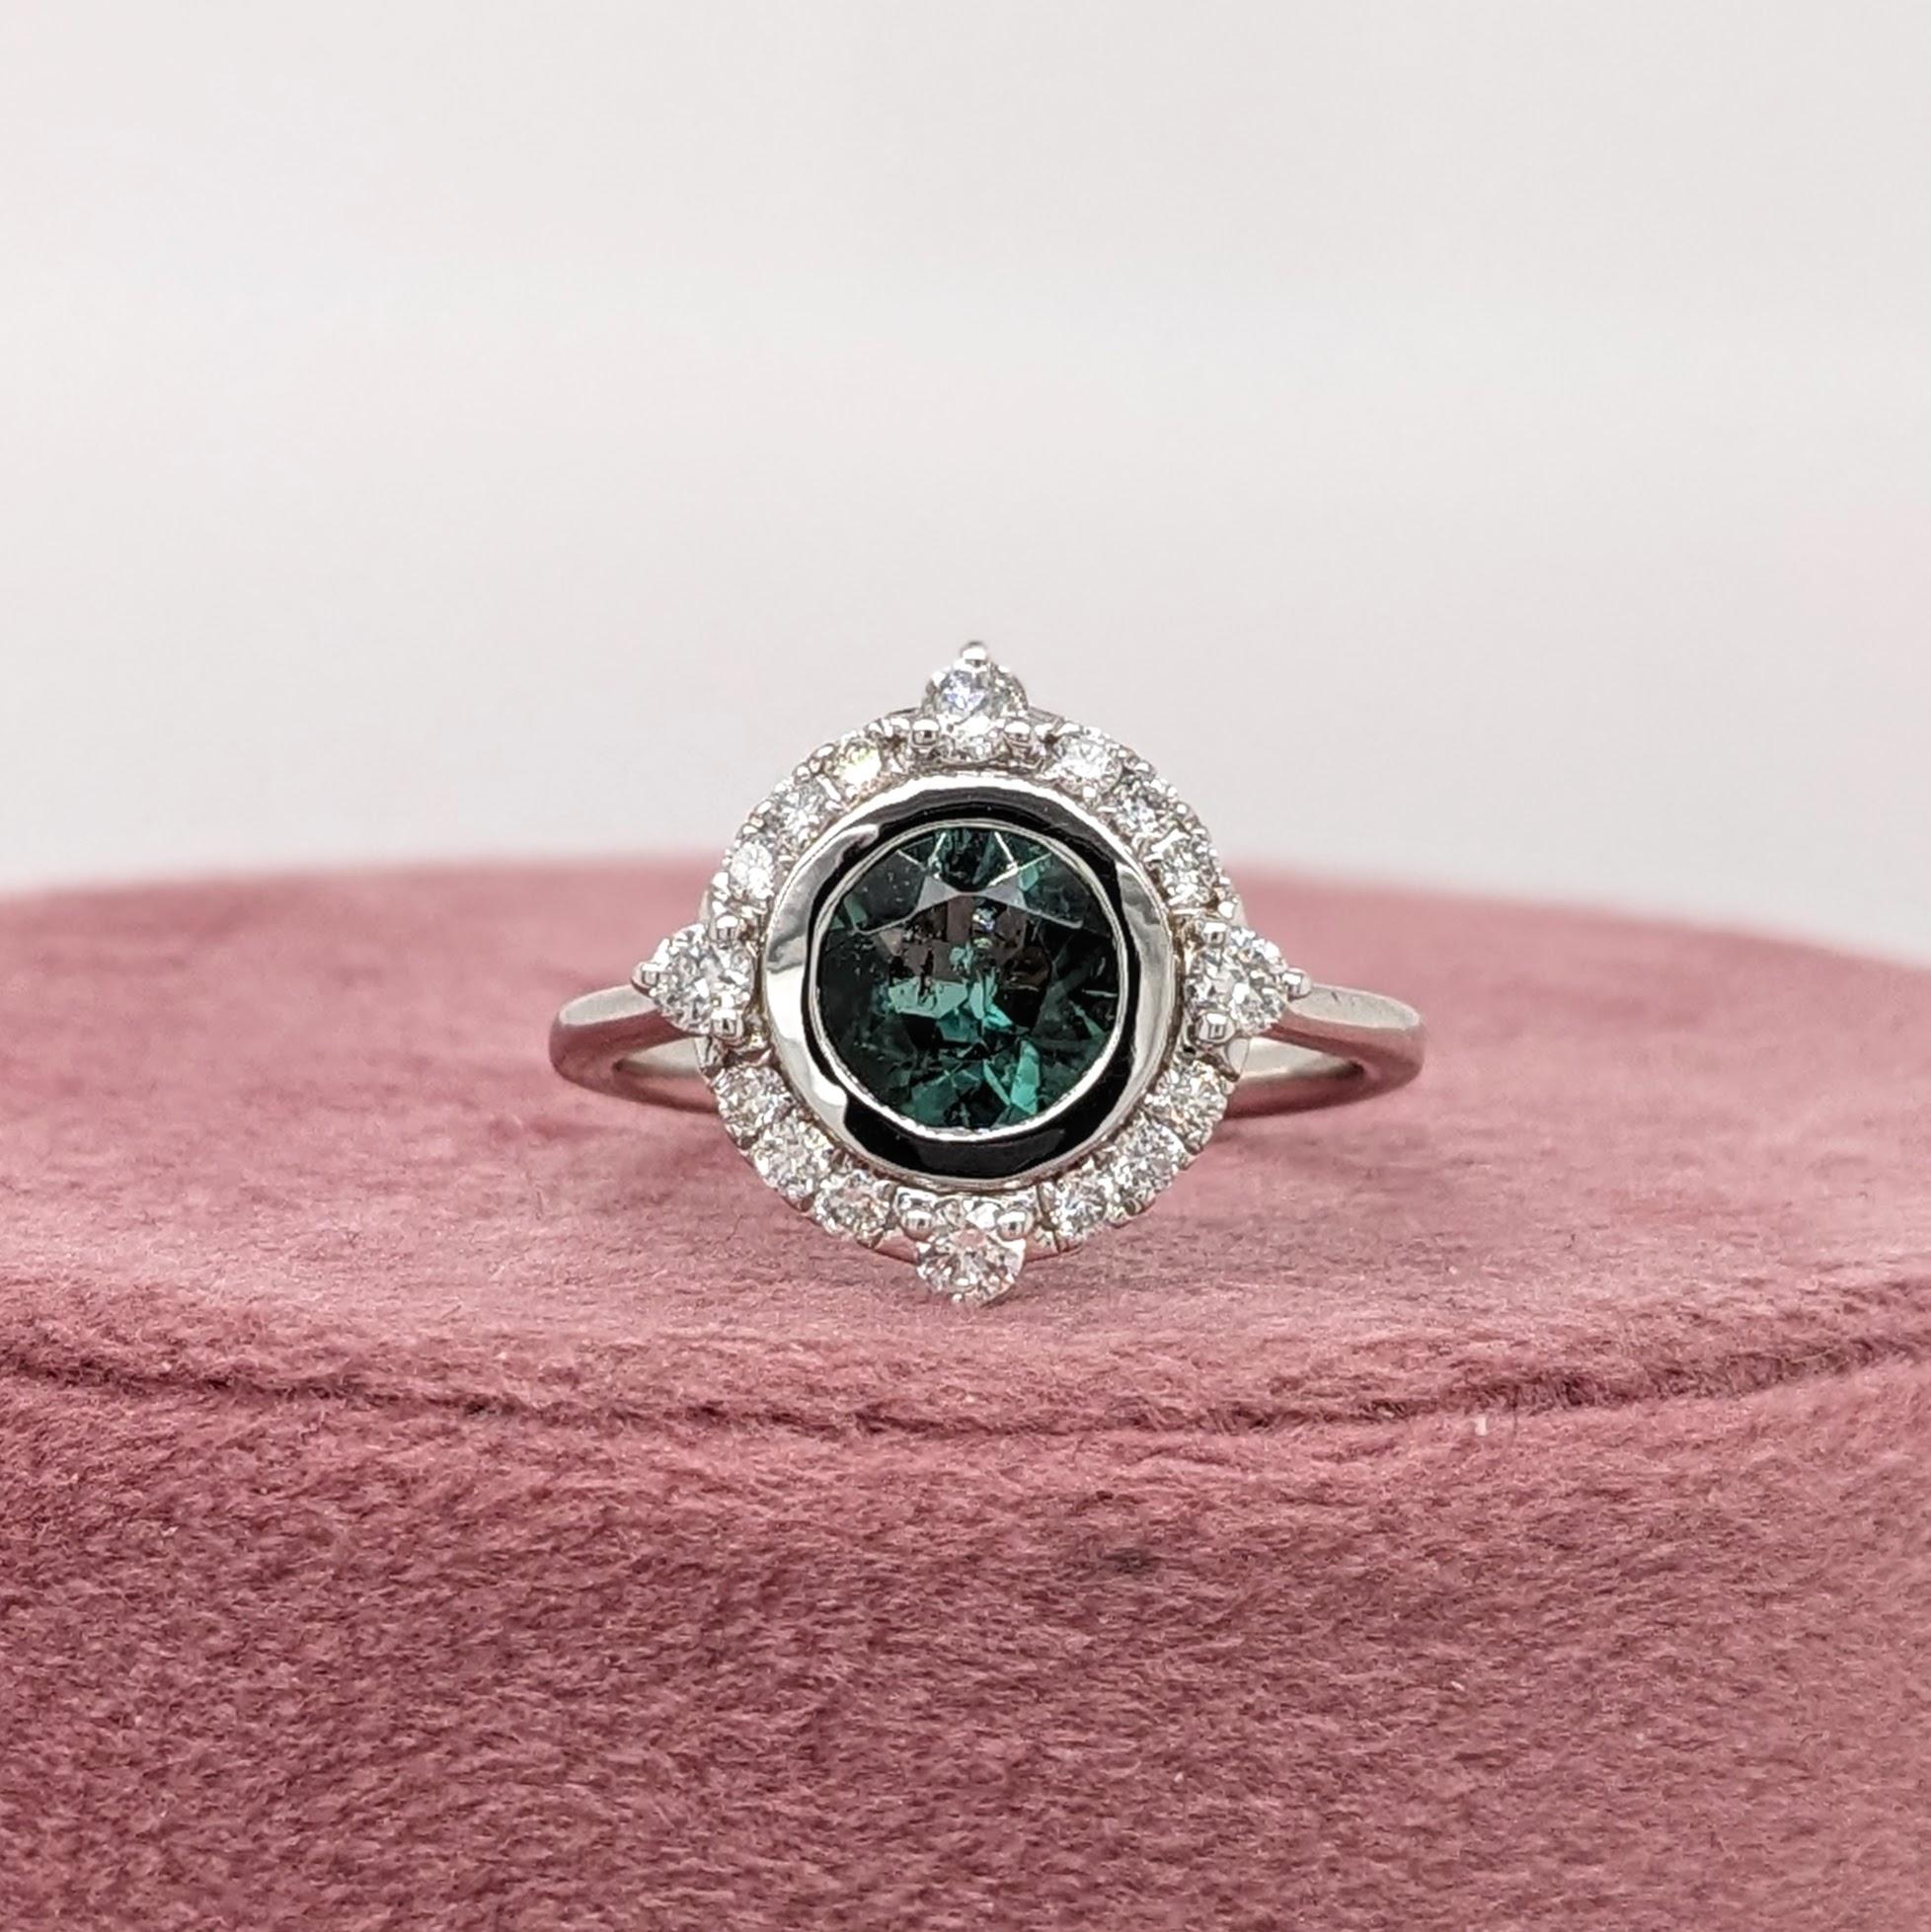 A unique statement ring design featuring a stunning round cut green-blue Indicolite Tourmaline wrapped in 14k white gold with natural diamond accents.

Specifications:

Item Type: Ring
Center Stone: Tourmaline
Treatment: Heated
Weight: 1.14ct
Head